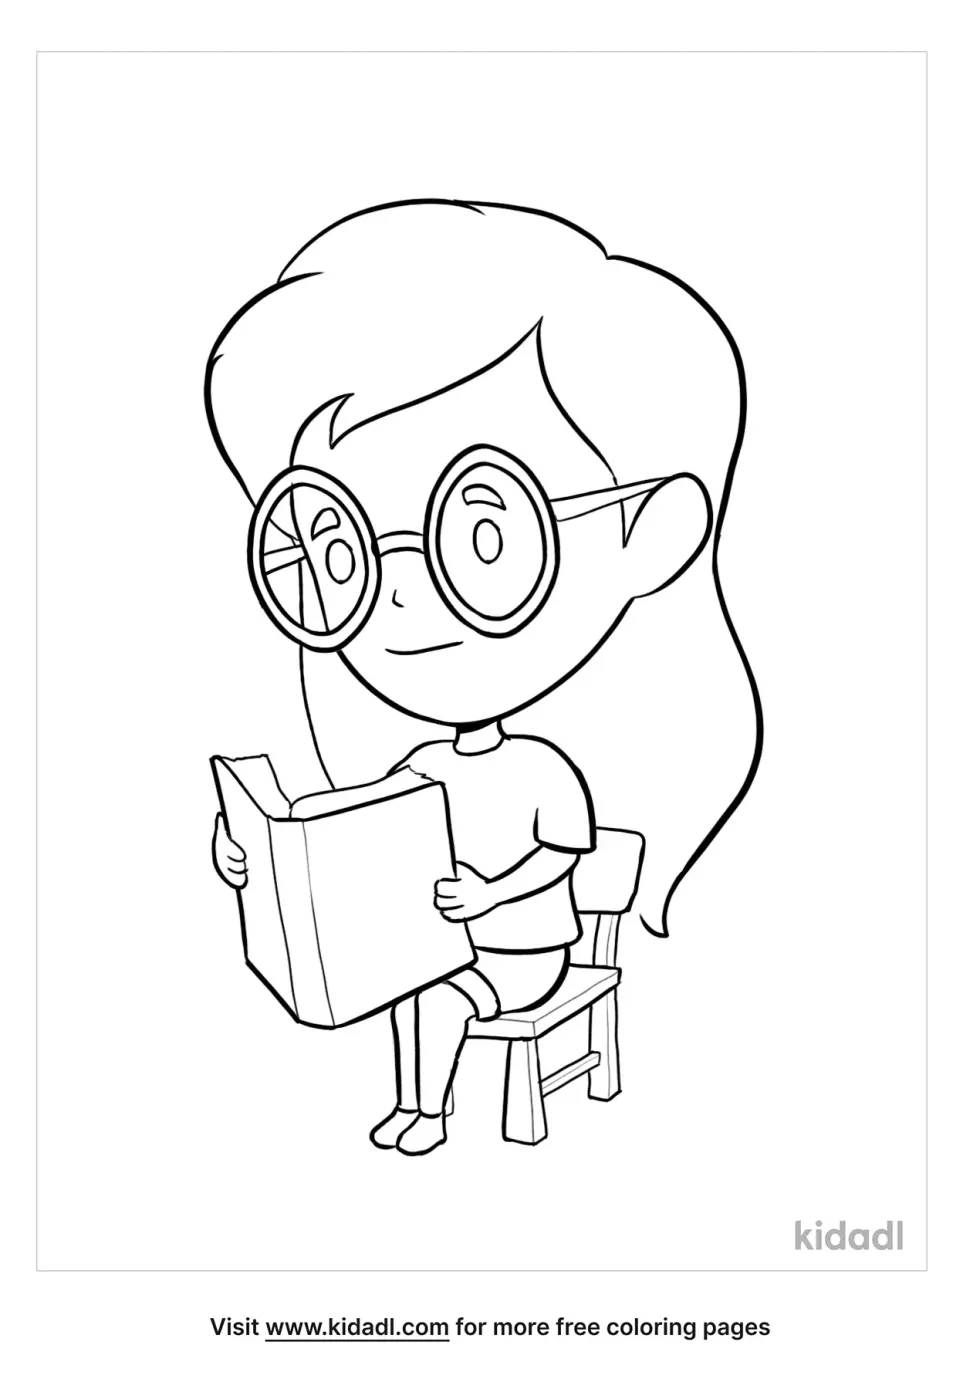 Study Coloring Page